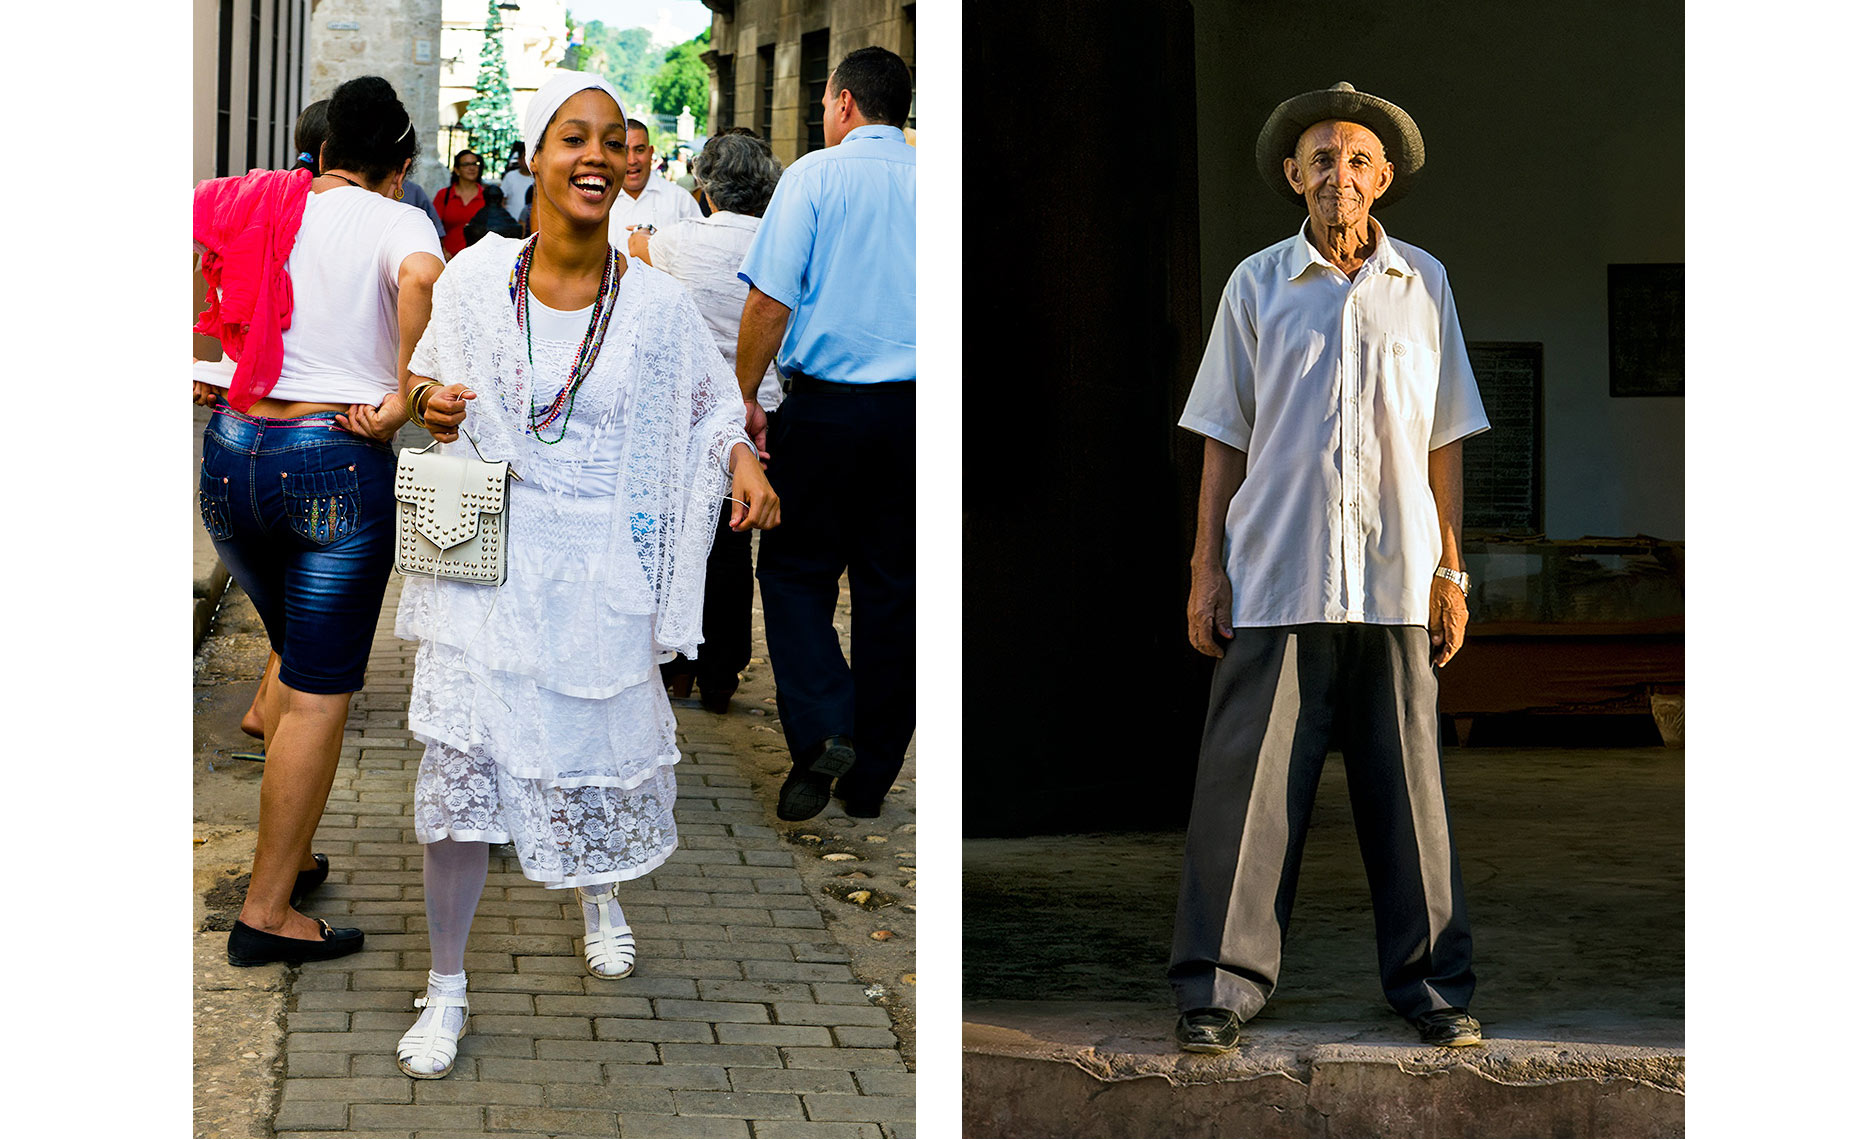 Traditional Cuban clothing